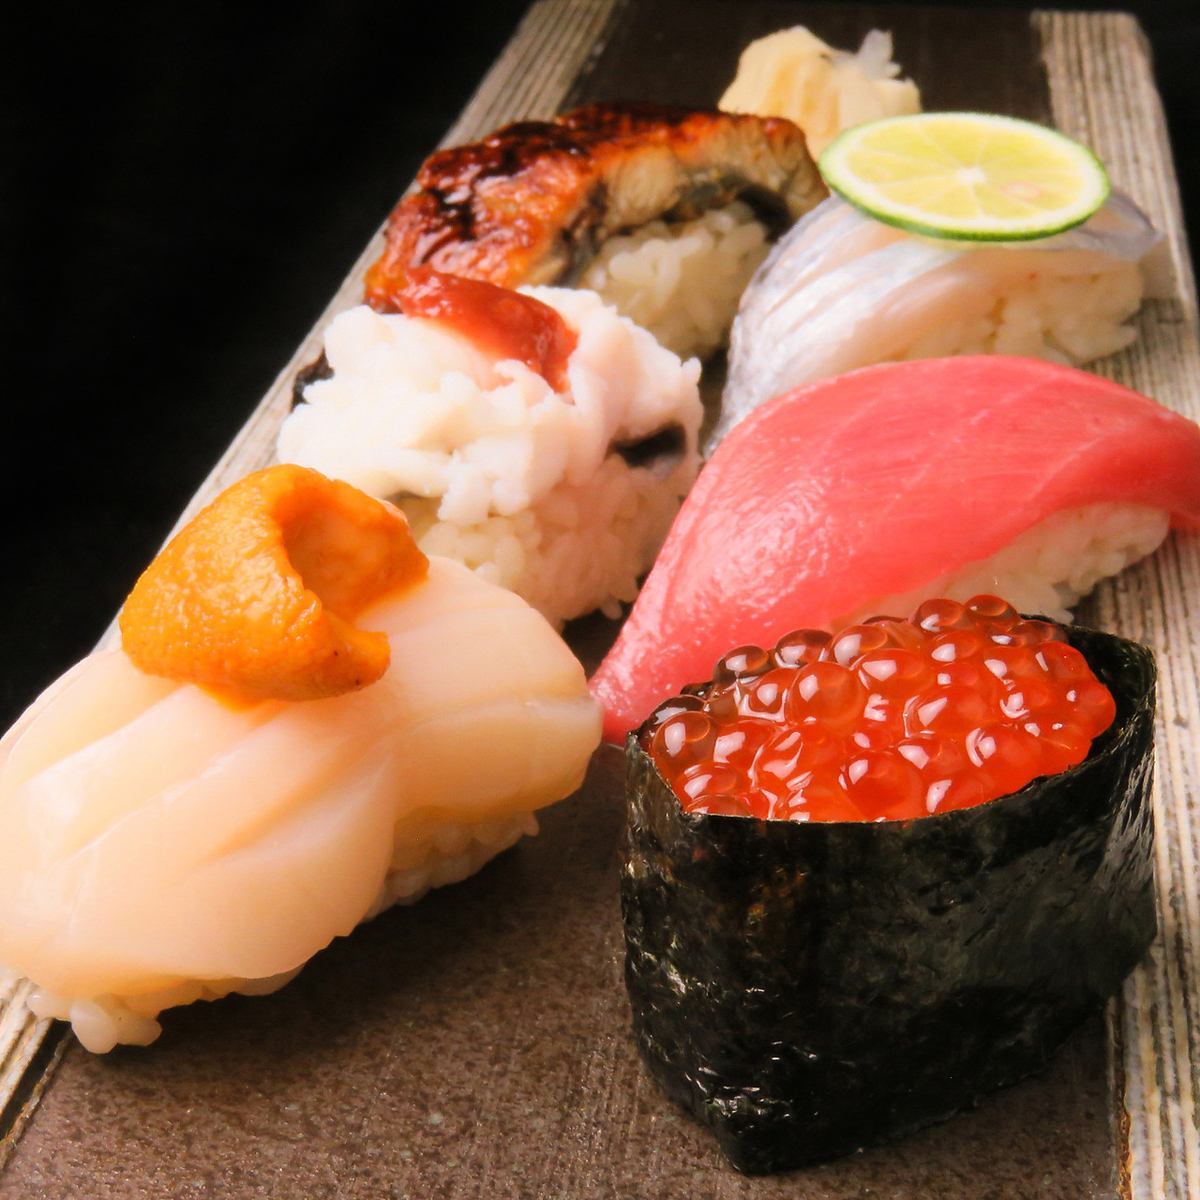 A casual “sushi date” is modern! At a public sushi bar♪